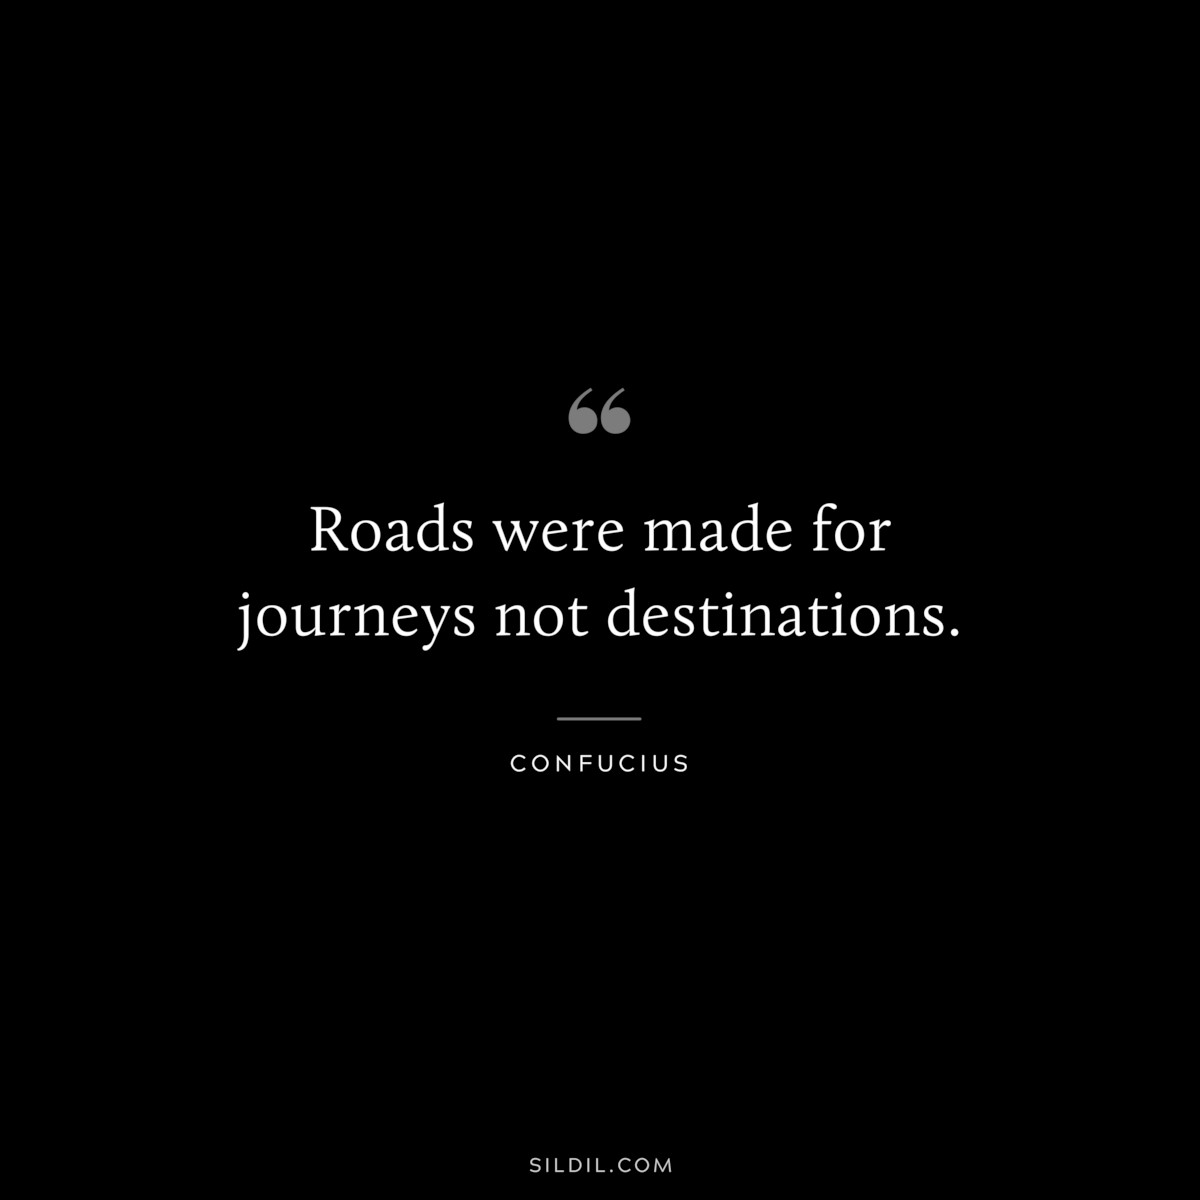 Roads were made for journeys not destinations. ― Confucius